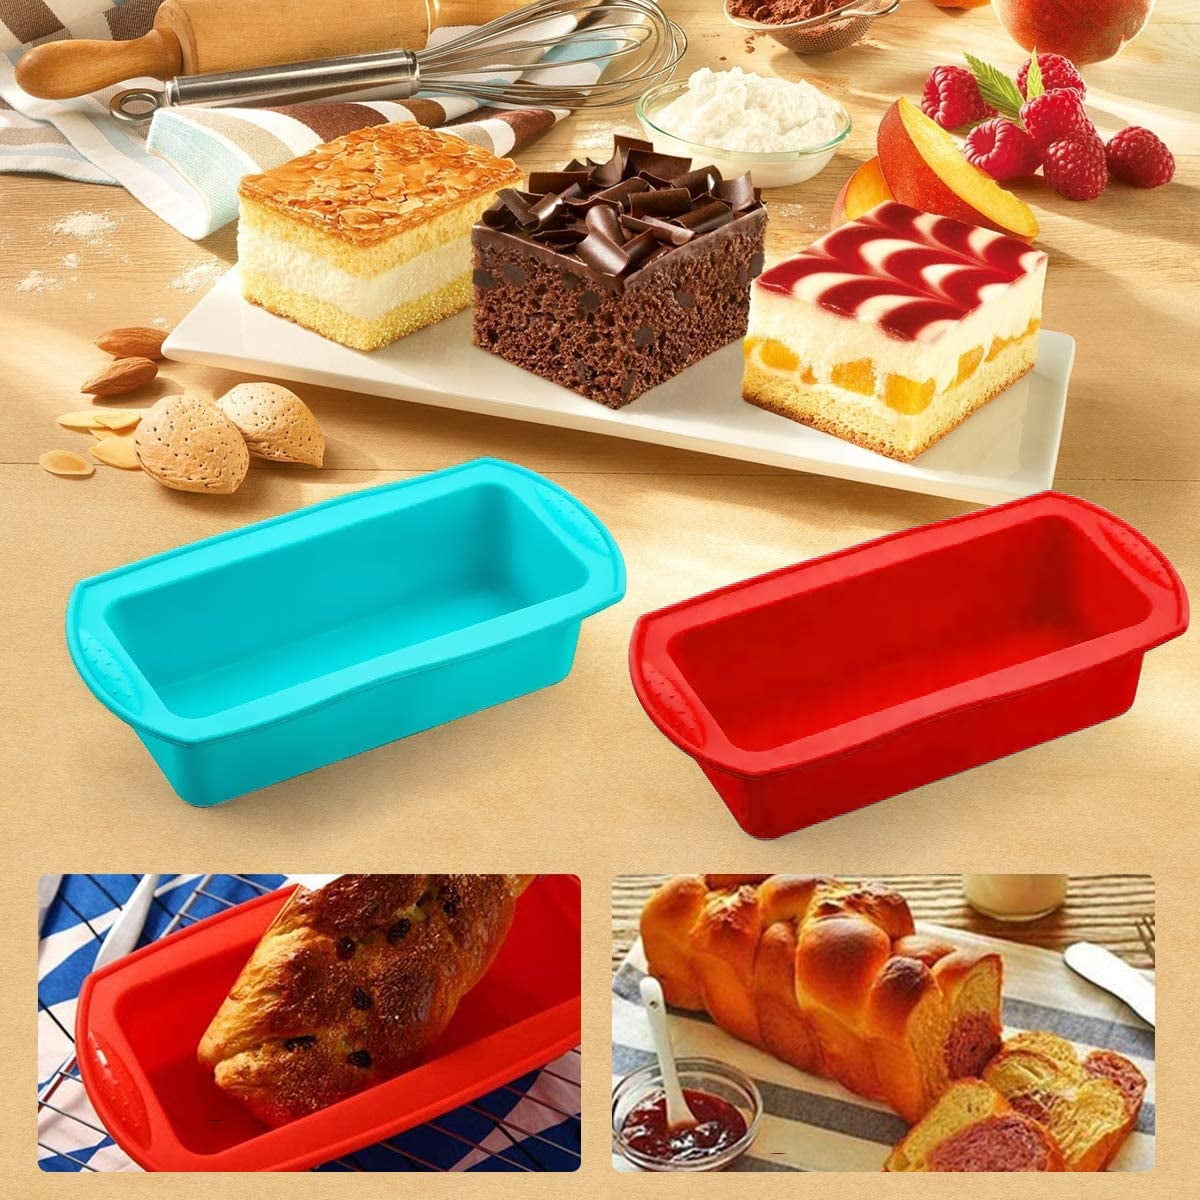 TOPOLMOLD 2 Pieces Silicone Bread Loaf Pan Cake Mold Nonstick Silicone  Homemade Loaf Holiday Baking Pan for Homemade Cake, Break, Meatloaf, Quiche